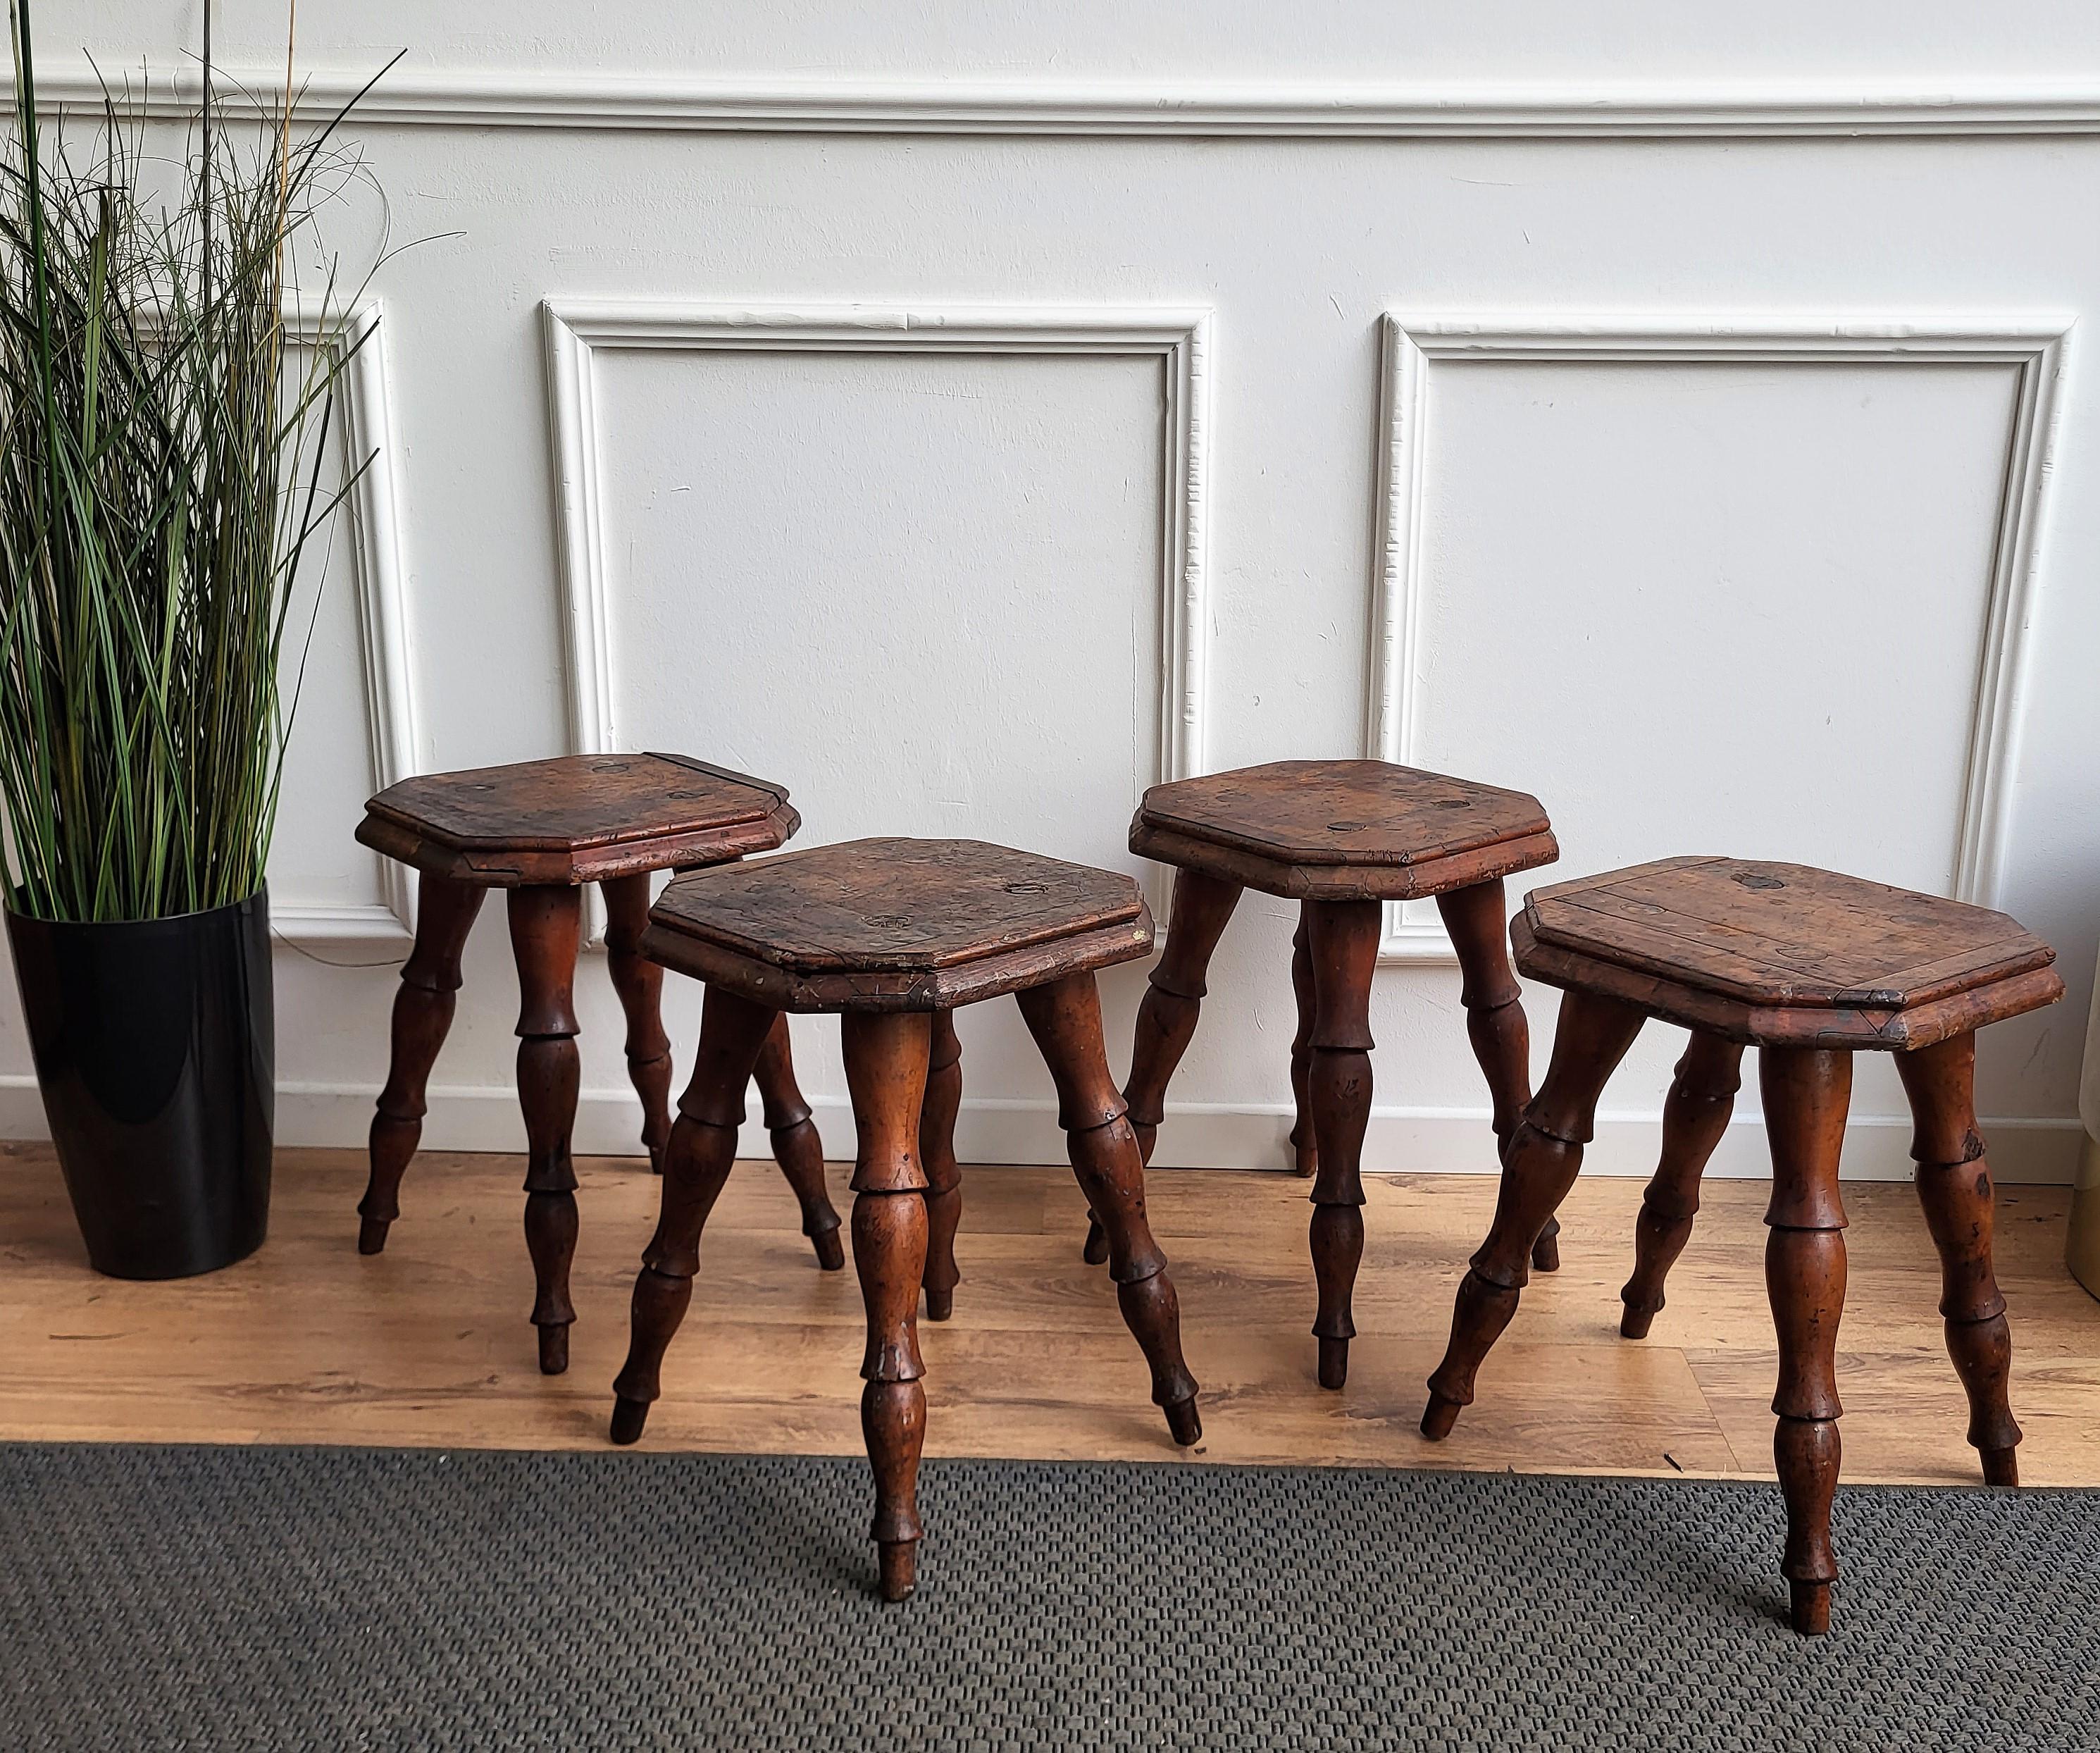 Set of 4 Antique Italian Walnut Side Tables or Stools with Carved Turned Legs For Sale 1